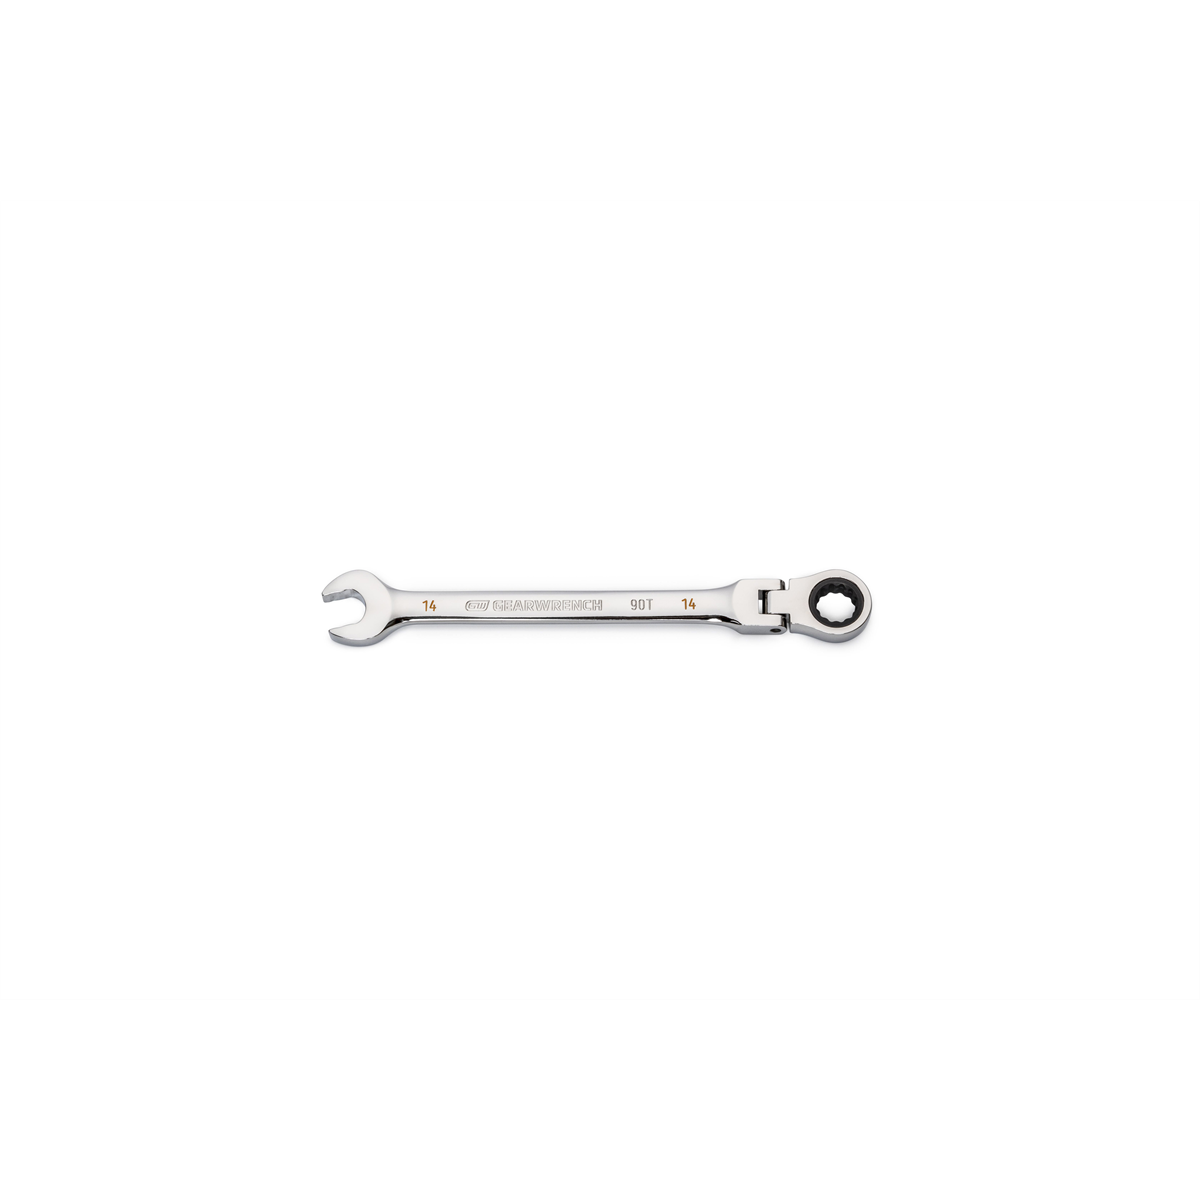 KDT86714 14 mm 90T 12 Point Flex-Head Combination Ratcheting Wrench -  Gearwrench